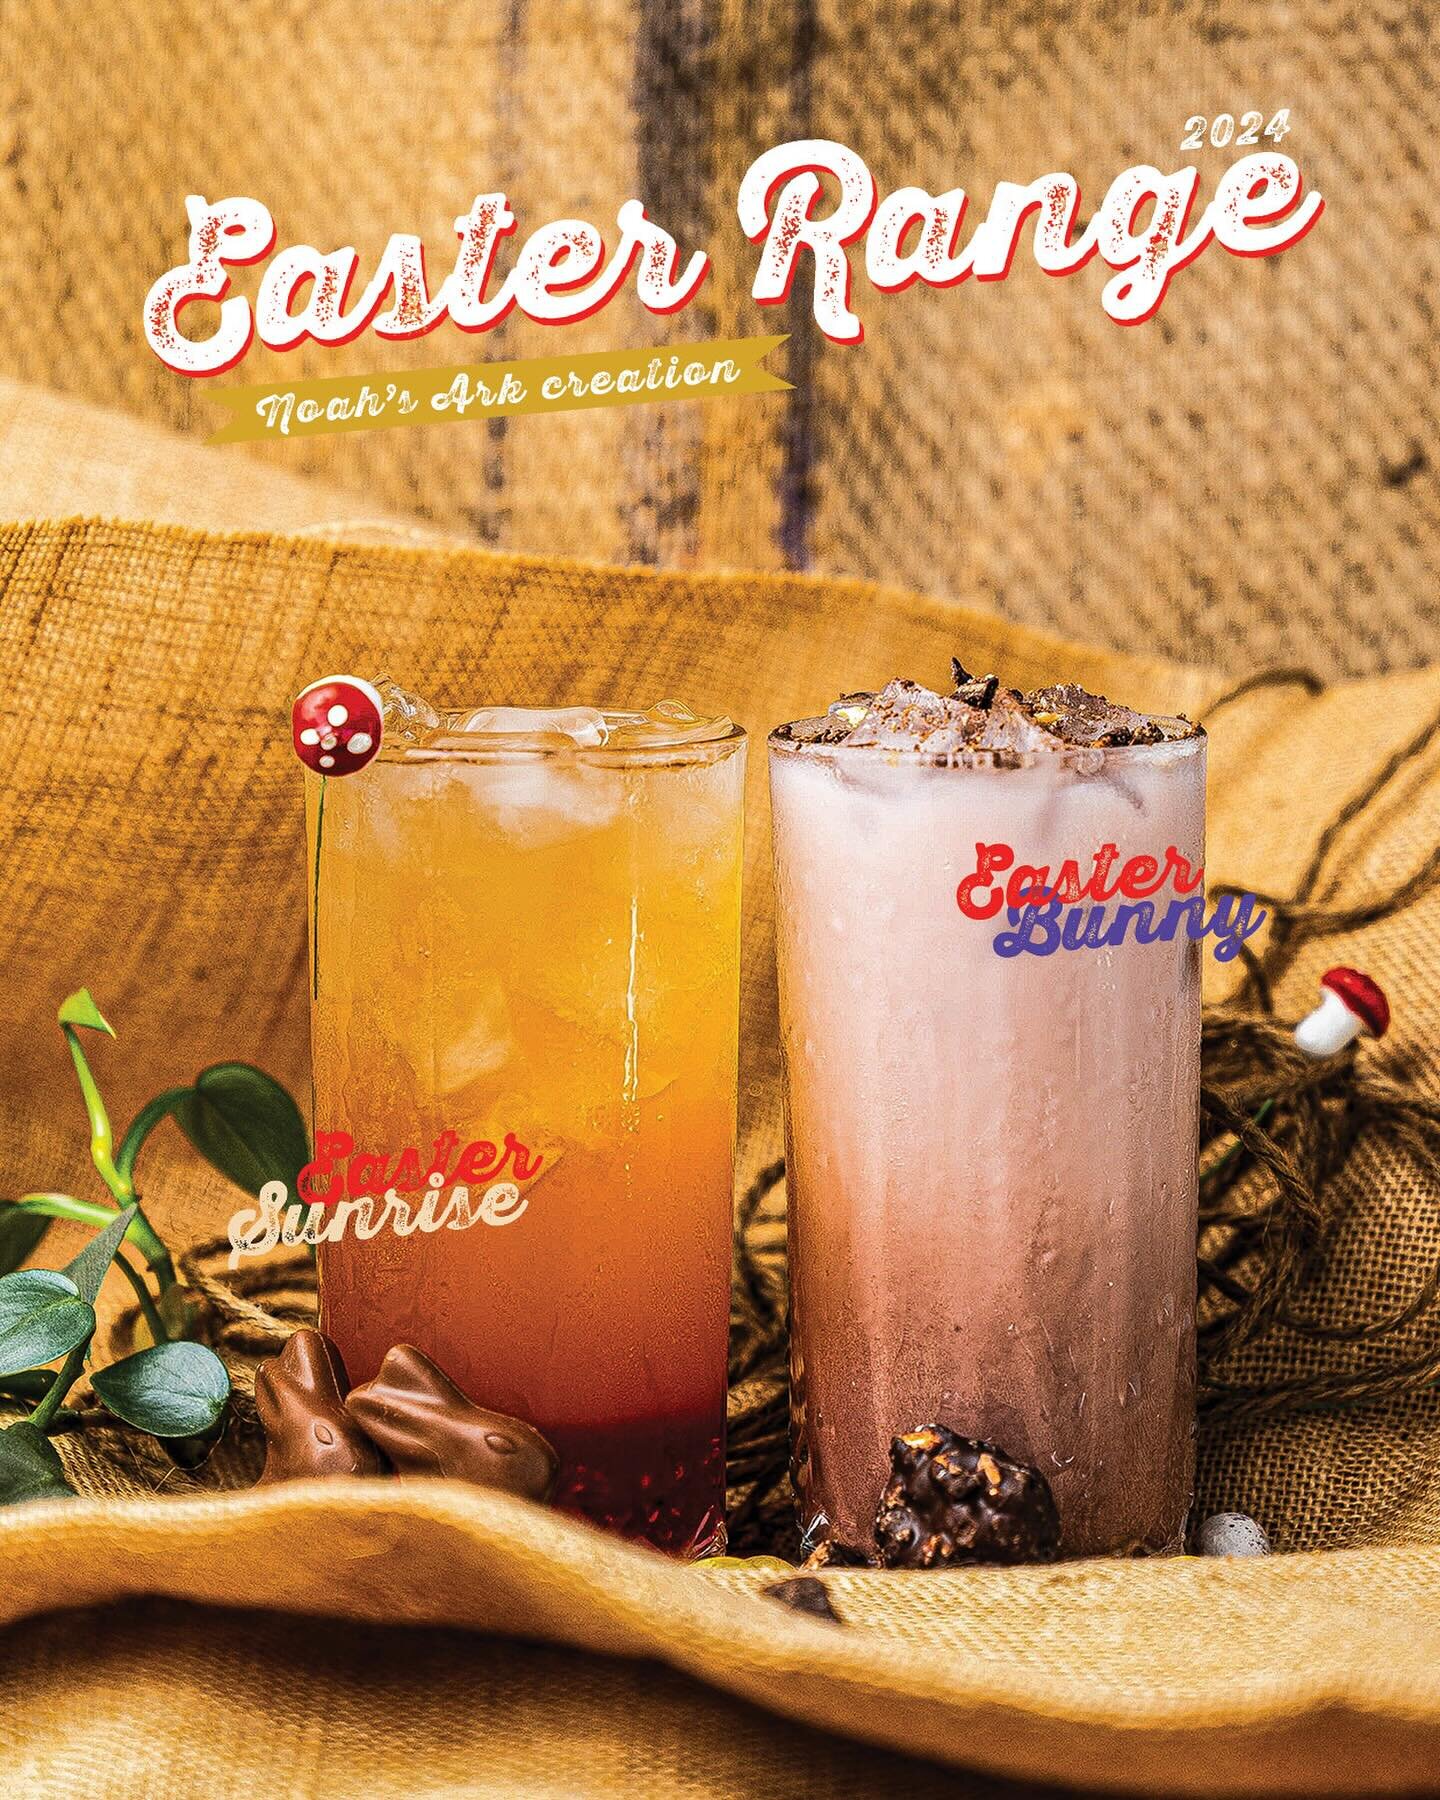 🐣 Introducing our Easter series 🤭 the left is our Easter sunrise which is a refreshing Raspberry and peach drink and on the right is our Easter Bunny which will feature our popular taro and chocolate flavours 😍 

Our Easter series will be availabl